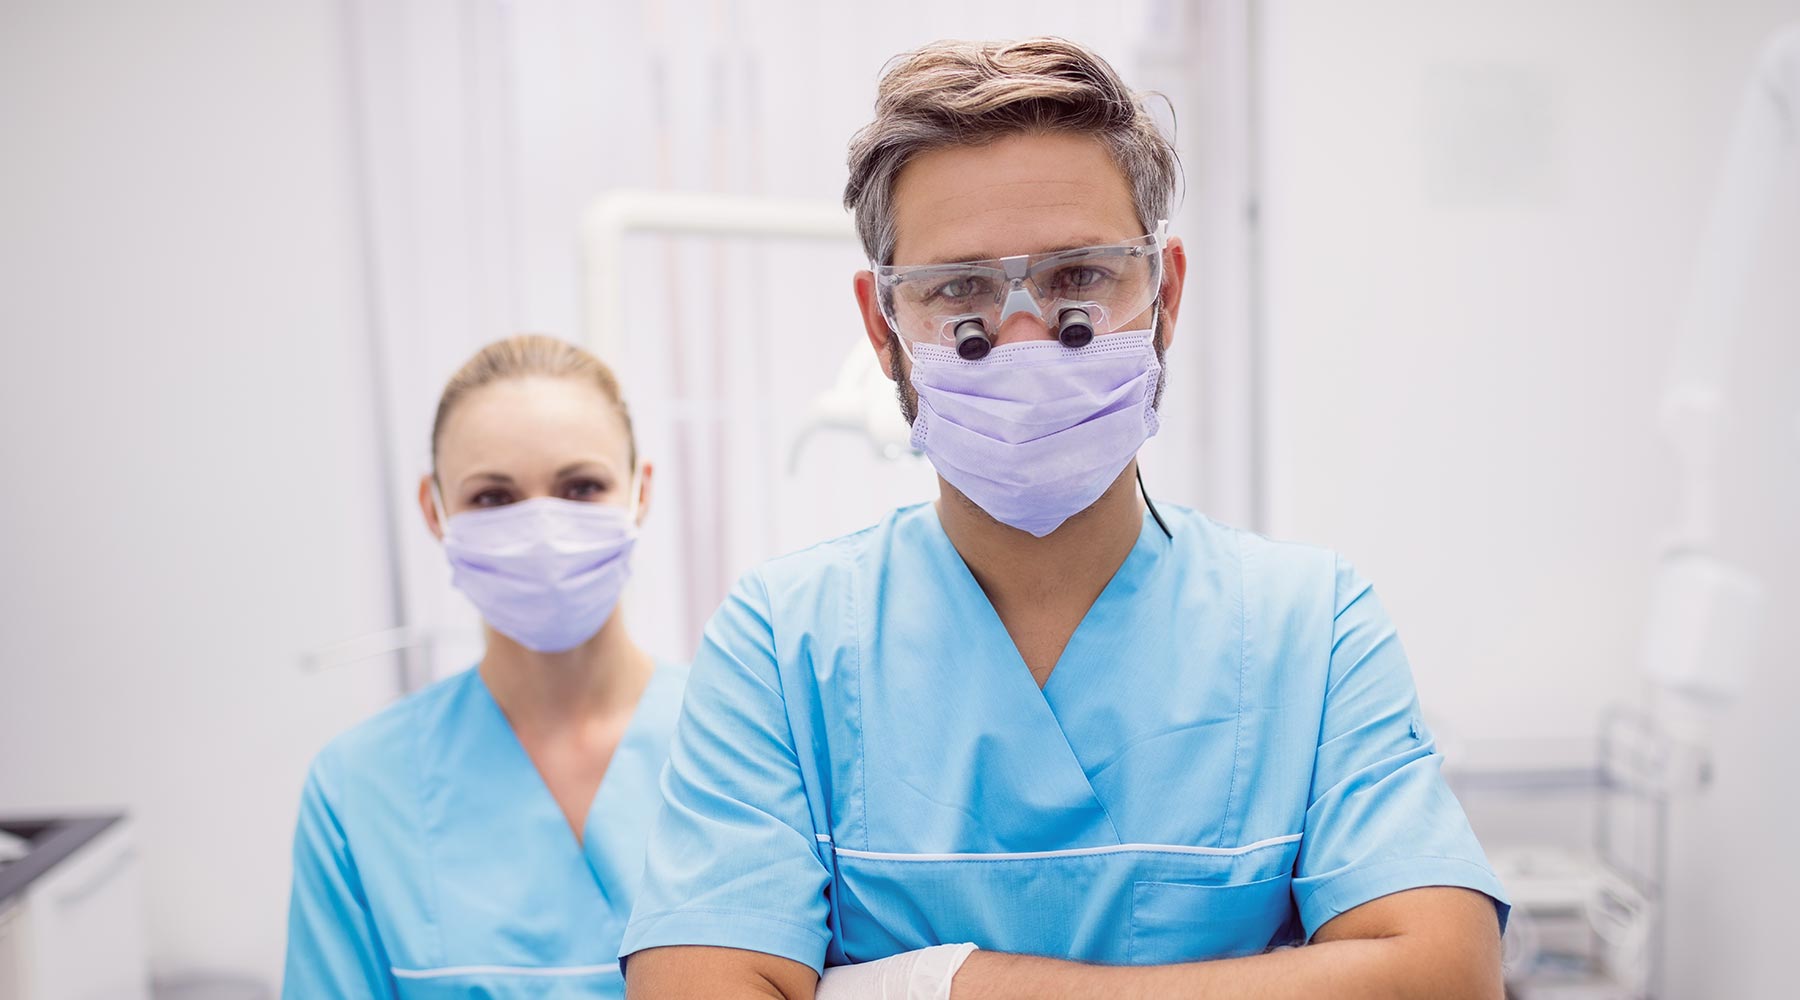 The differences between National Health and Private dentists